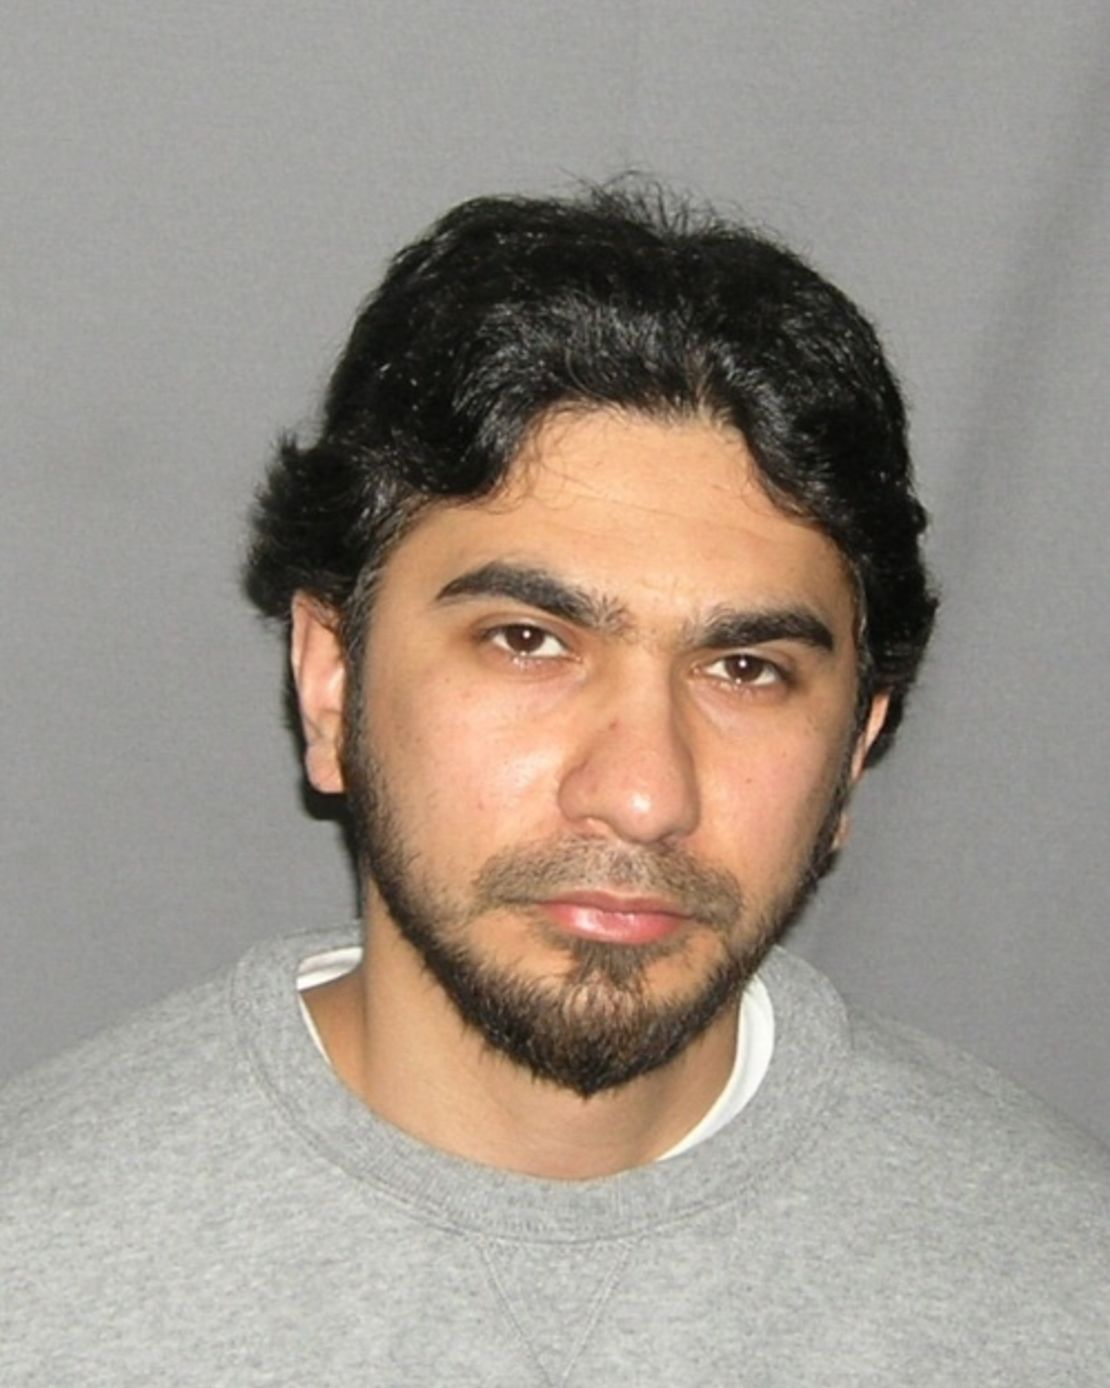 Faisal Shahzad tried to detonate a car bomb in New York's Times Square.